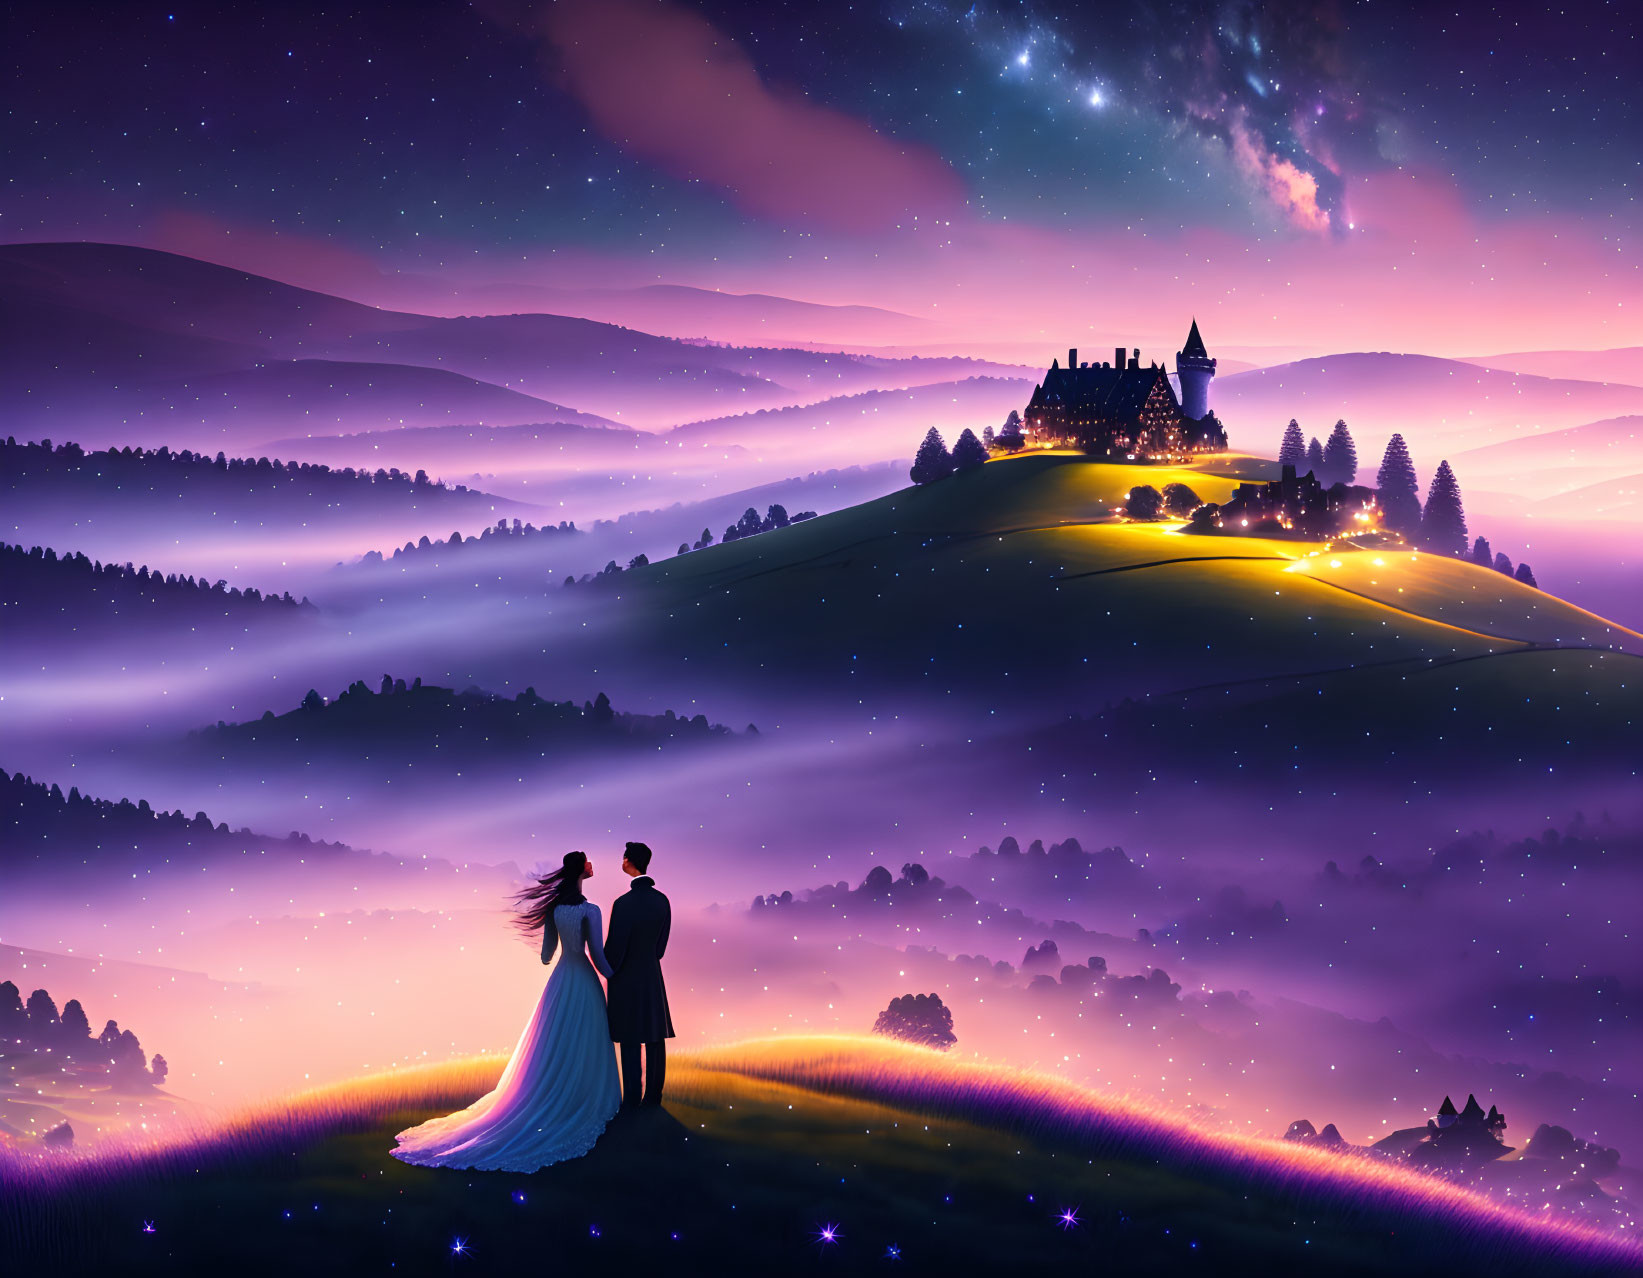 Couple on Hill Overlooking Fantasy Landscape with Castle and Starry Sky